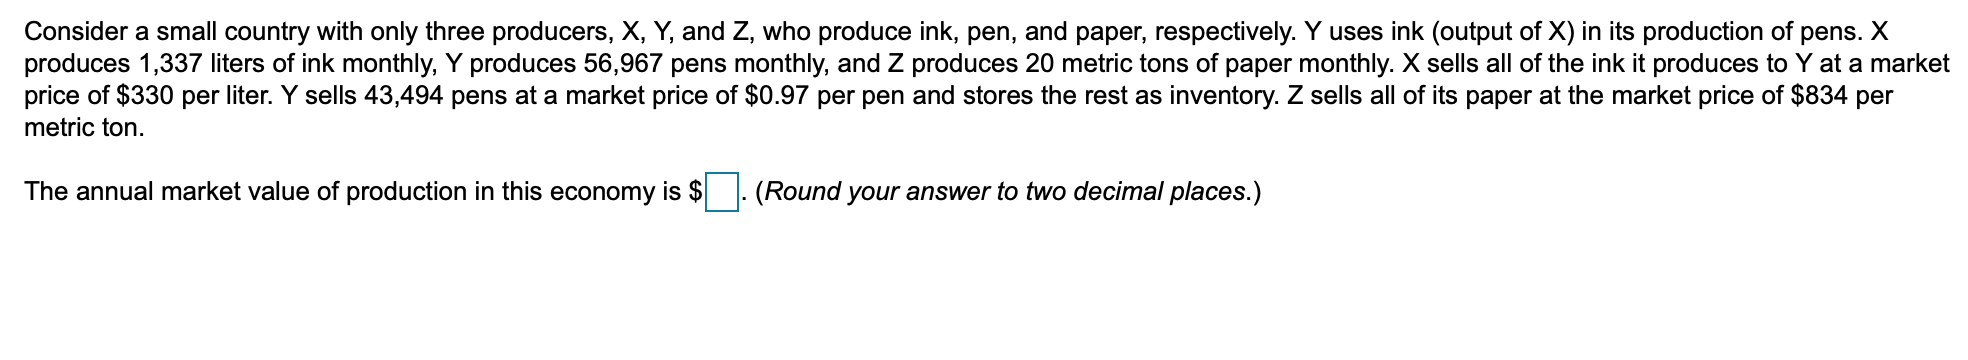 Consider a small country with only three producers, X, Y, and Z, who produce ink, pen, and paper, respectively. Y uses ink (output of X) in its production of pens. X
produces 1,337 liters of ink monthly, Y produces 56,967 pens monthly, and Z produces 20 metric tons of paper monthly. X sells all of the ink it produces to Y at a market
price of $330 per liter. Y sells 43,494 pens at a market price of $0.97 per pen and stores the rest as inventory. Z sells all of its paper at the market price of $834 per
metric ton
The annual market value of production in this economy is $
(Round your answer to two decimal places.)
